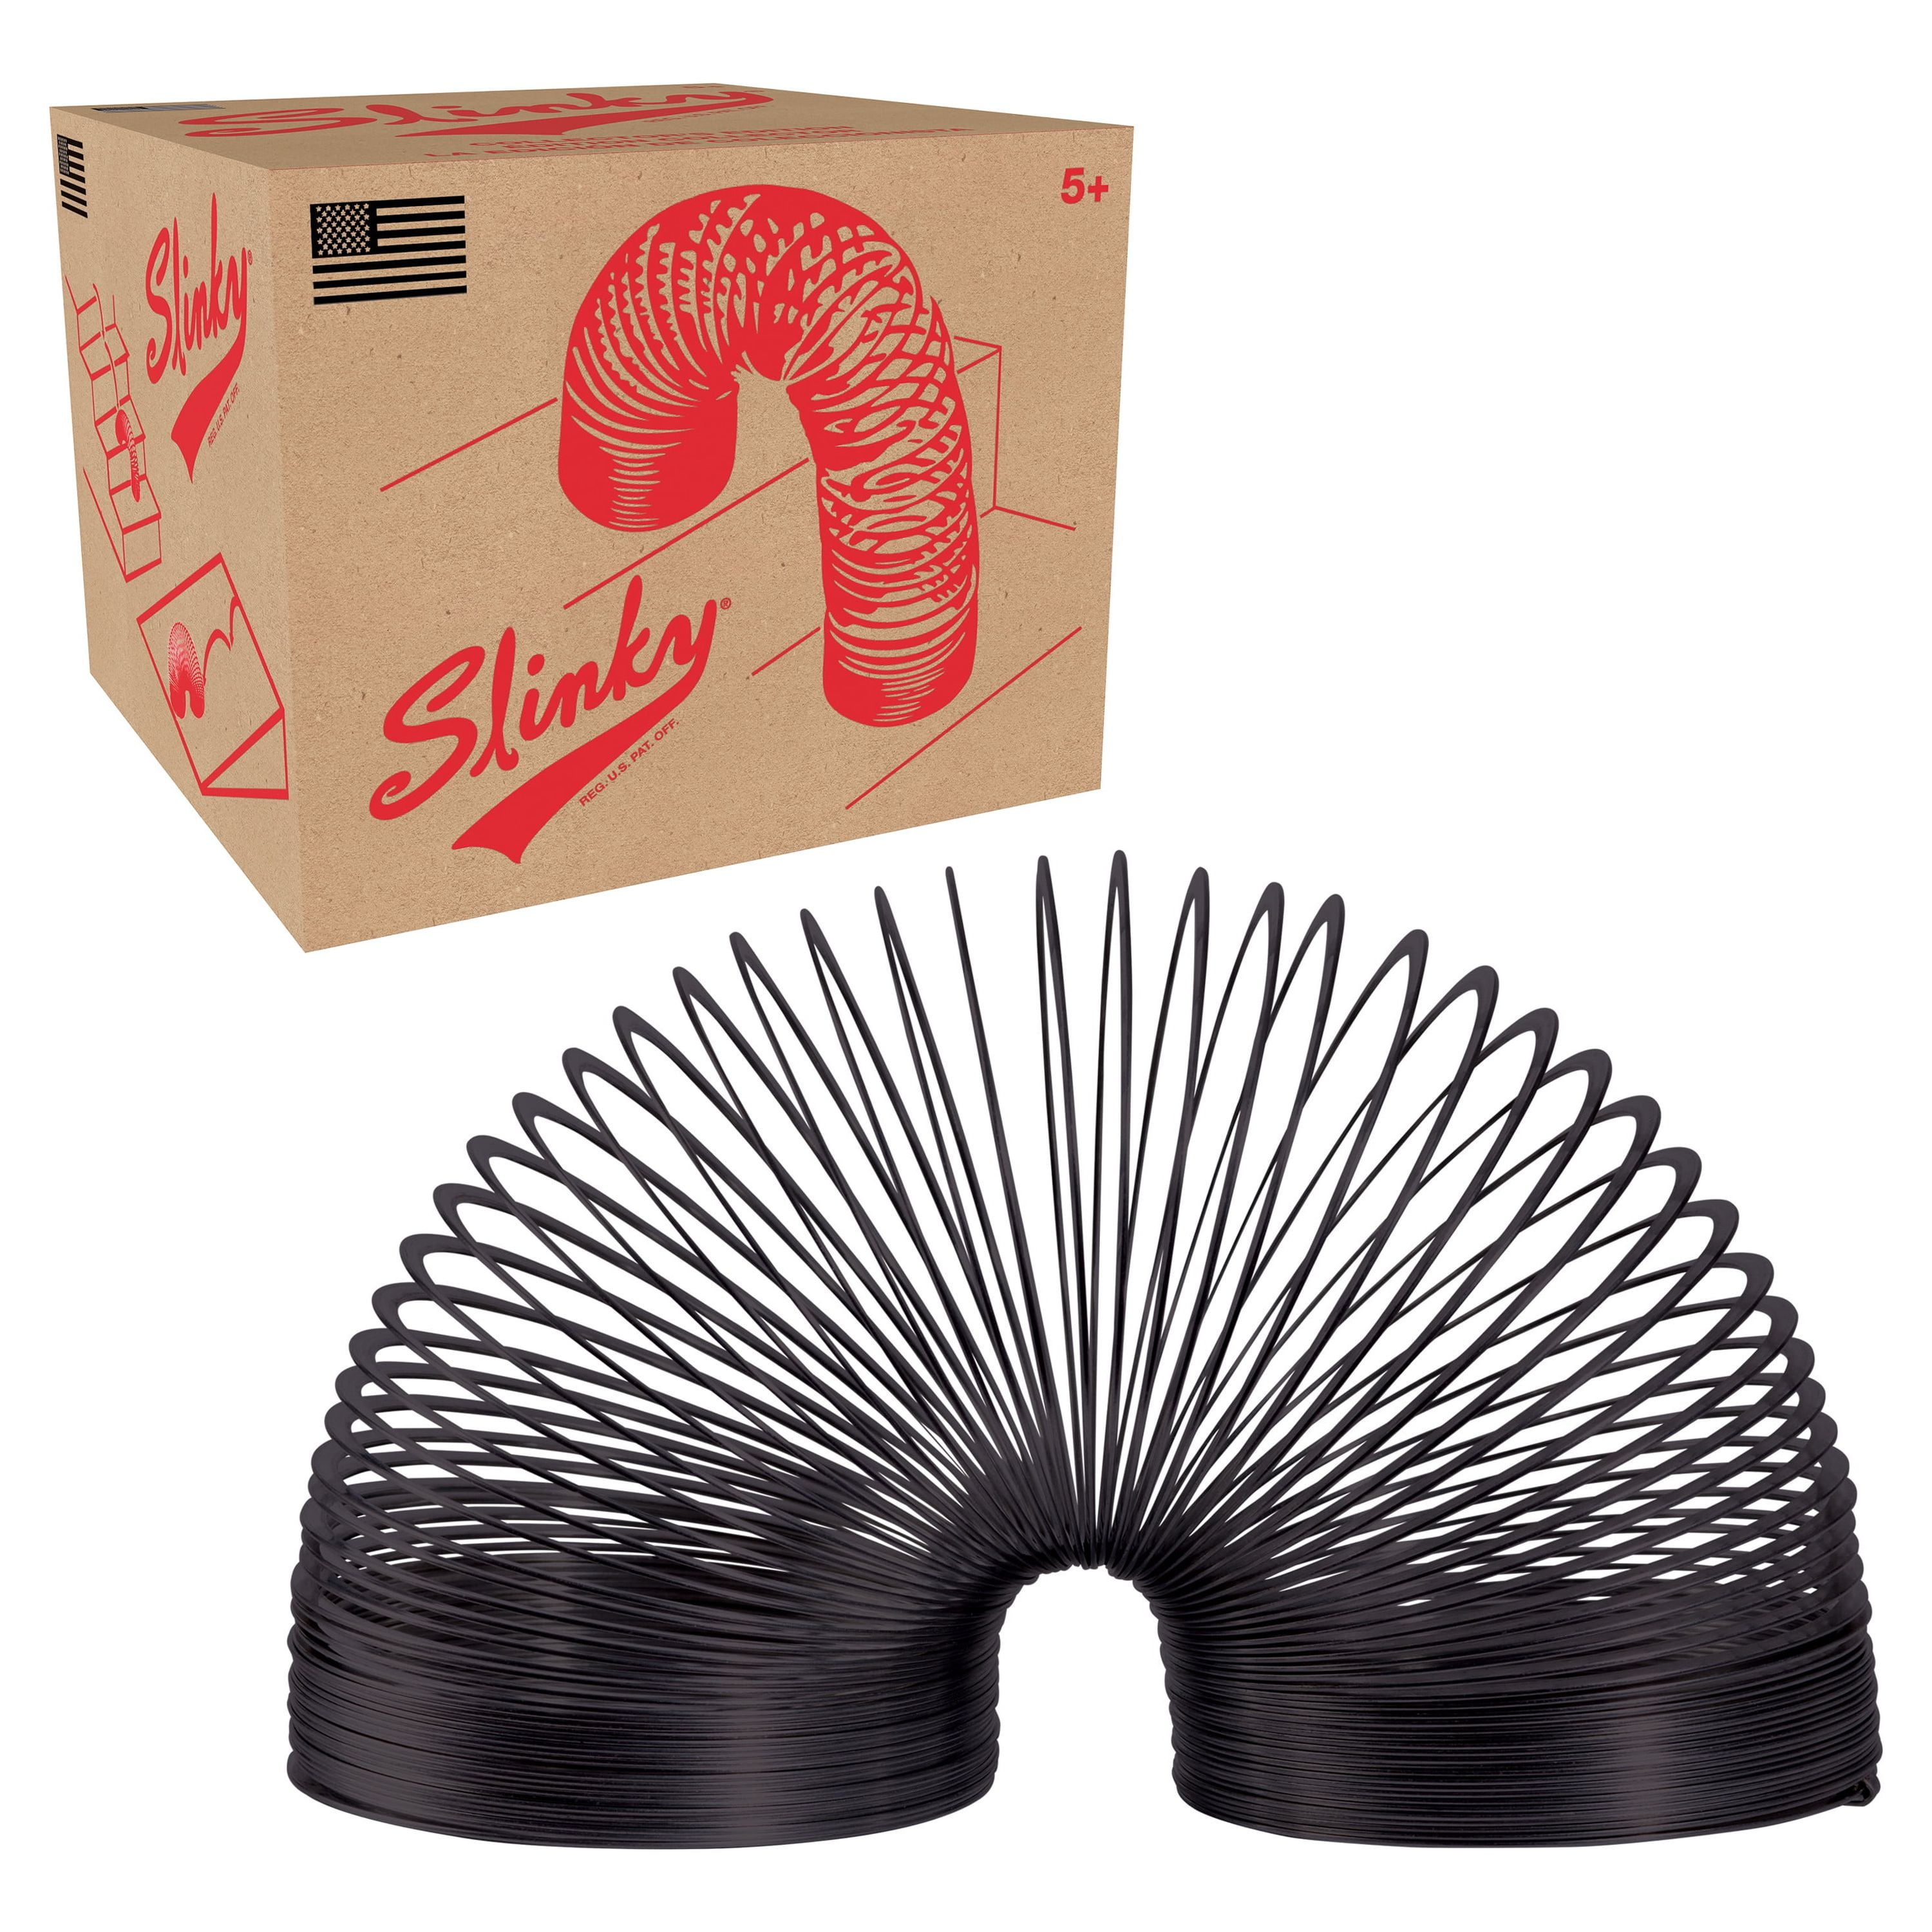 Just Play Collector’s Slinky The Original Walking Spring Toy, Black Metal  Slinky, Toys for 3 Year Old Girls and Boys, Party Favors, Fidget Toys